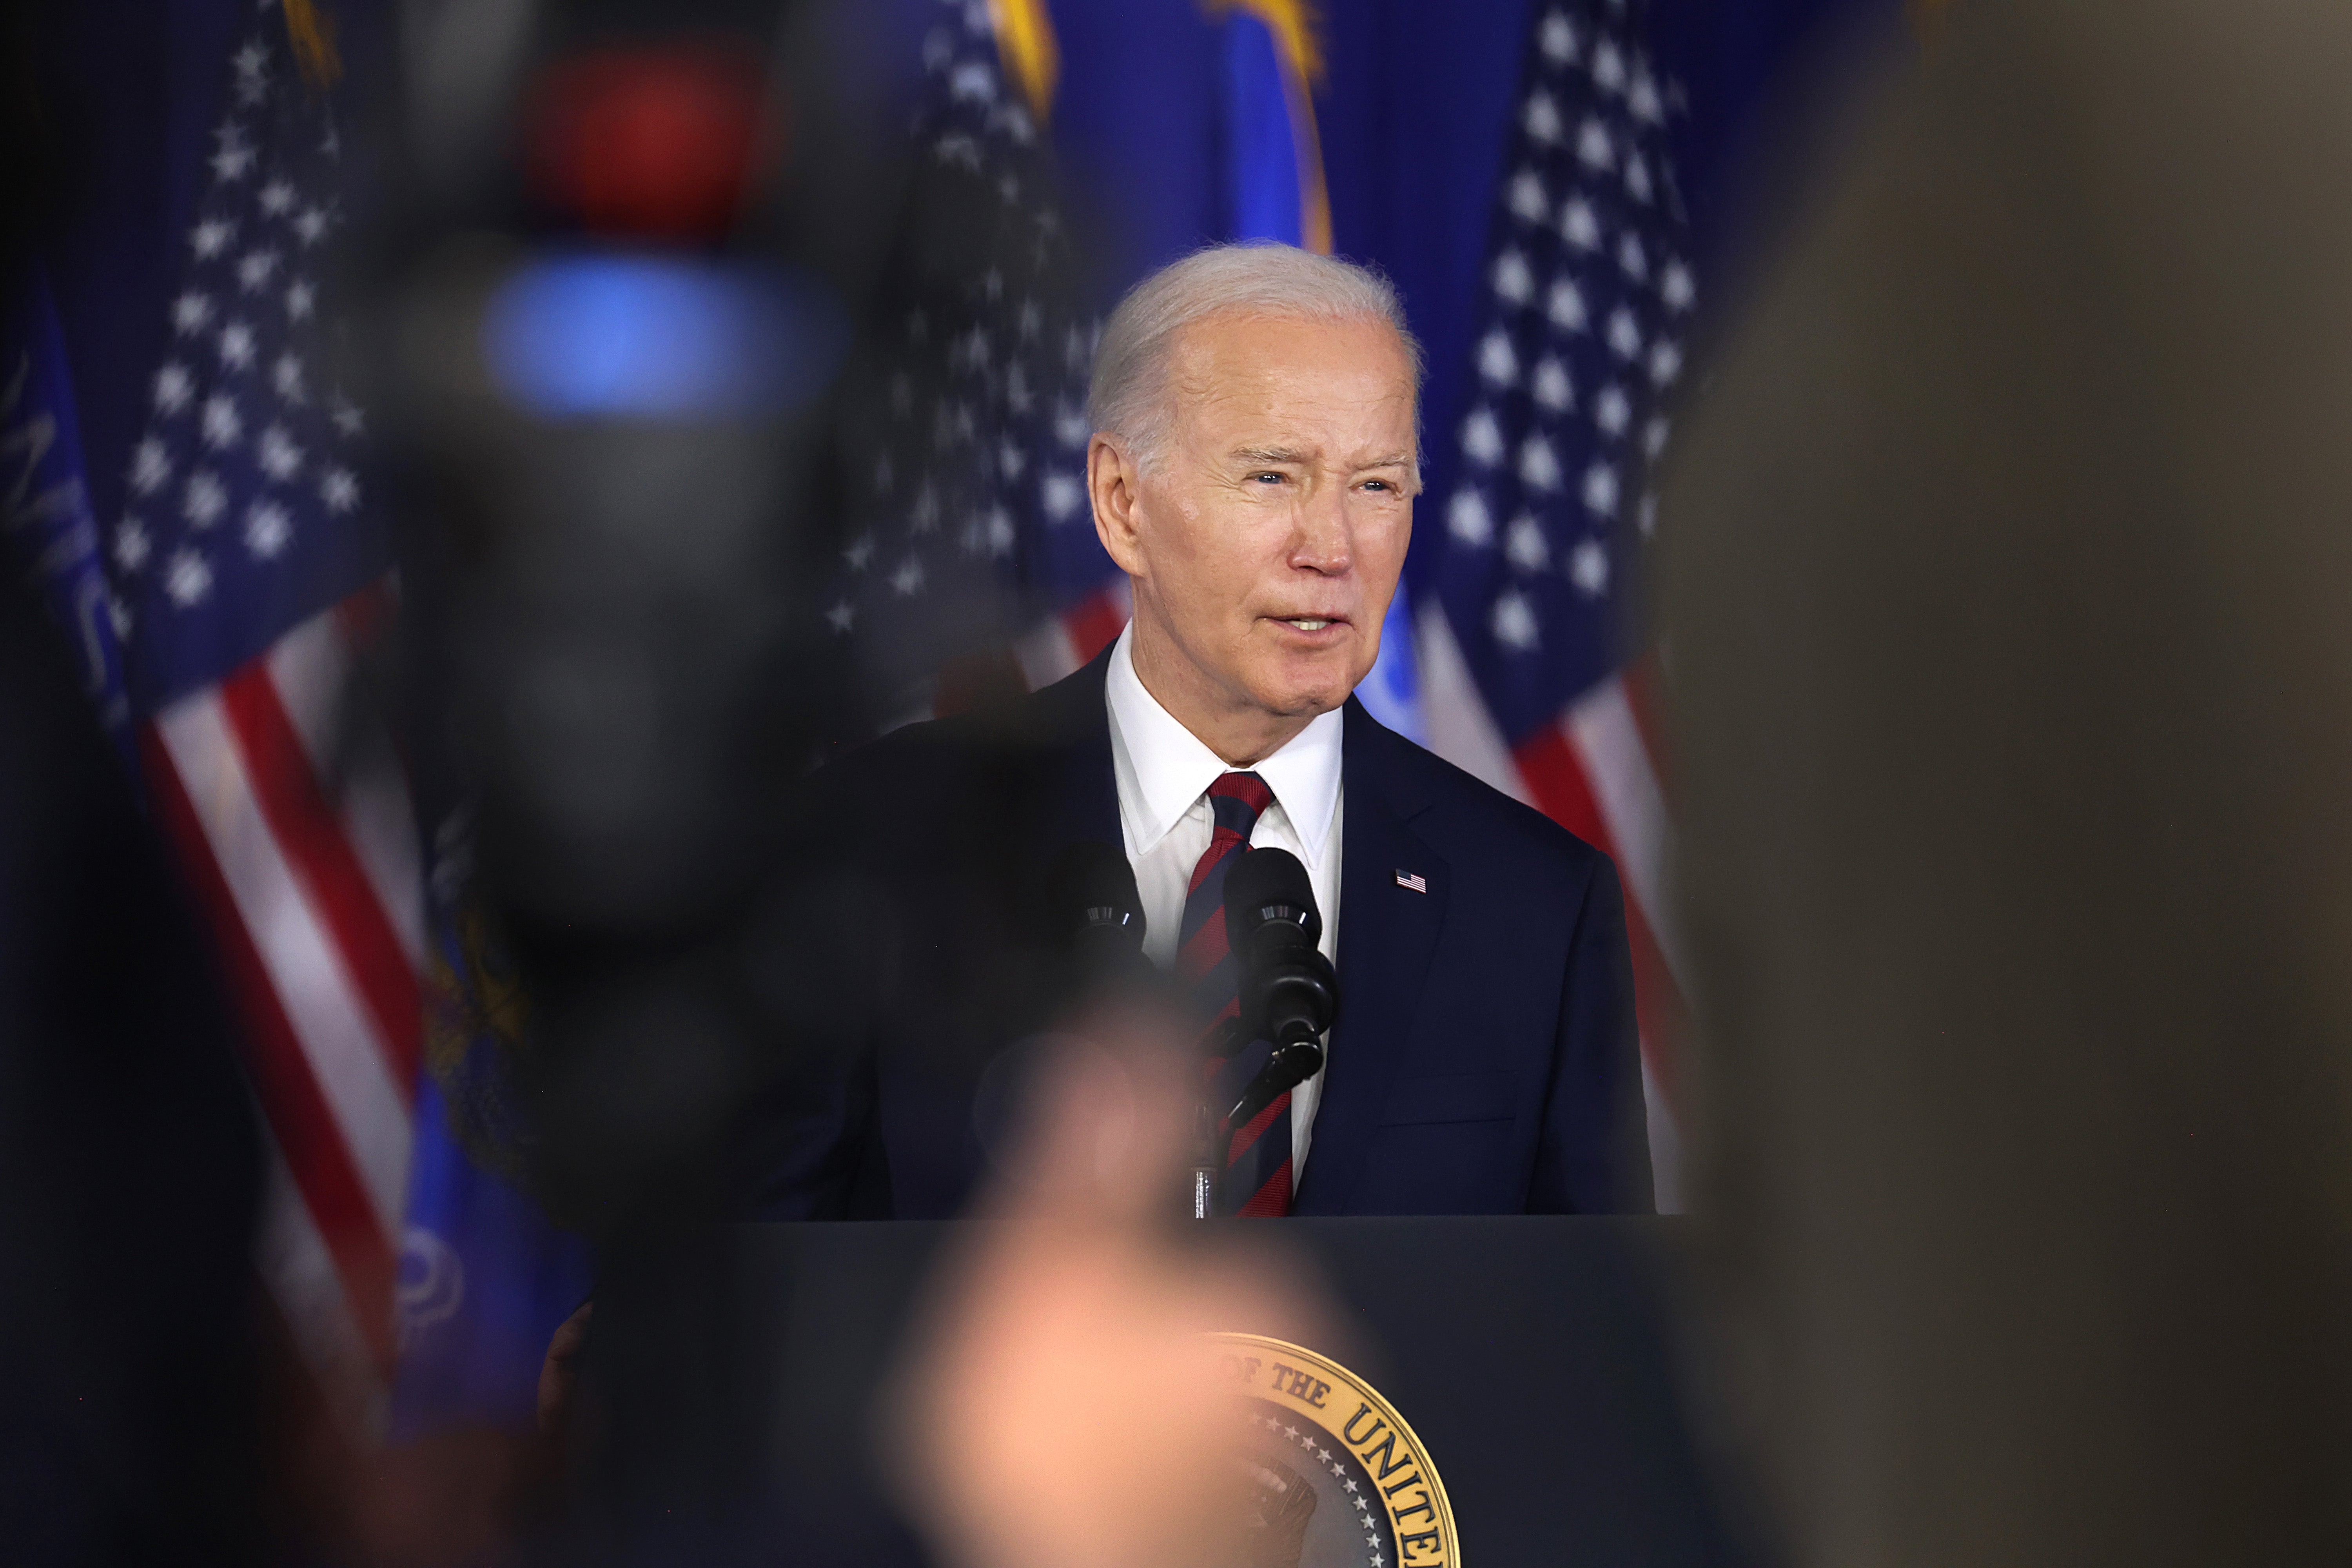 President Joe Biden has been the subject of a flailing Republican impeachment inquiry